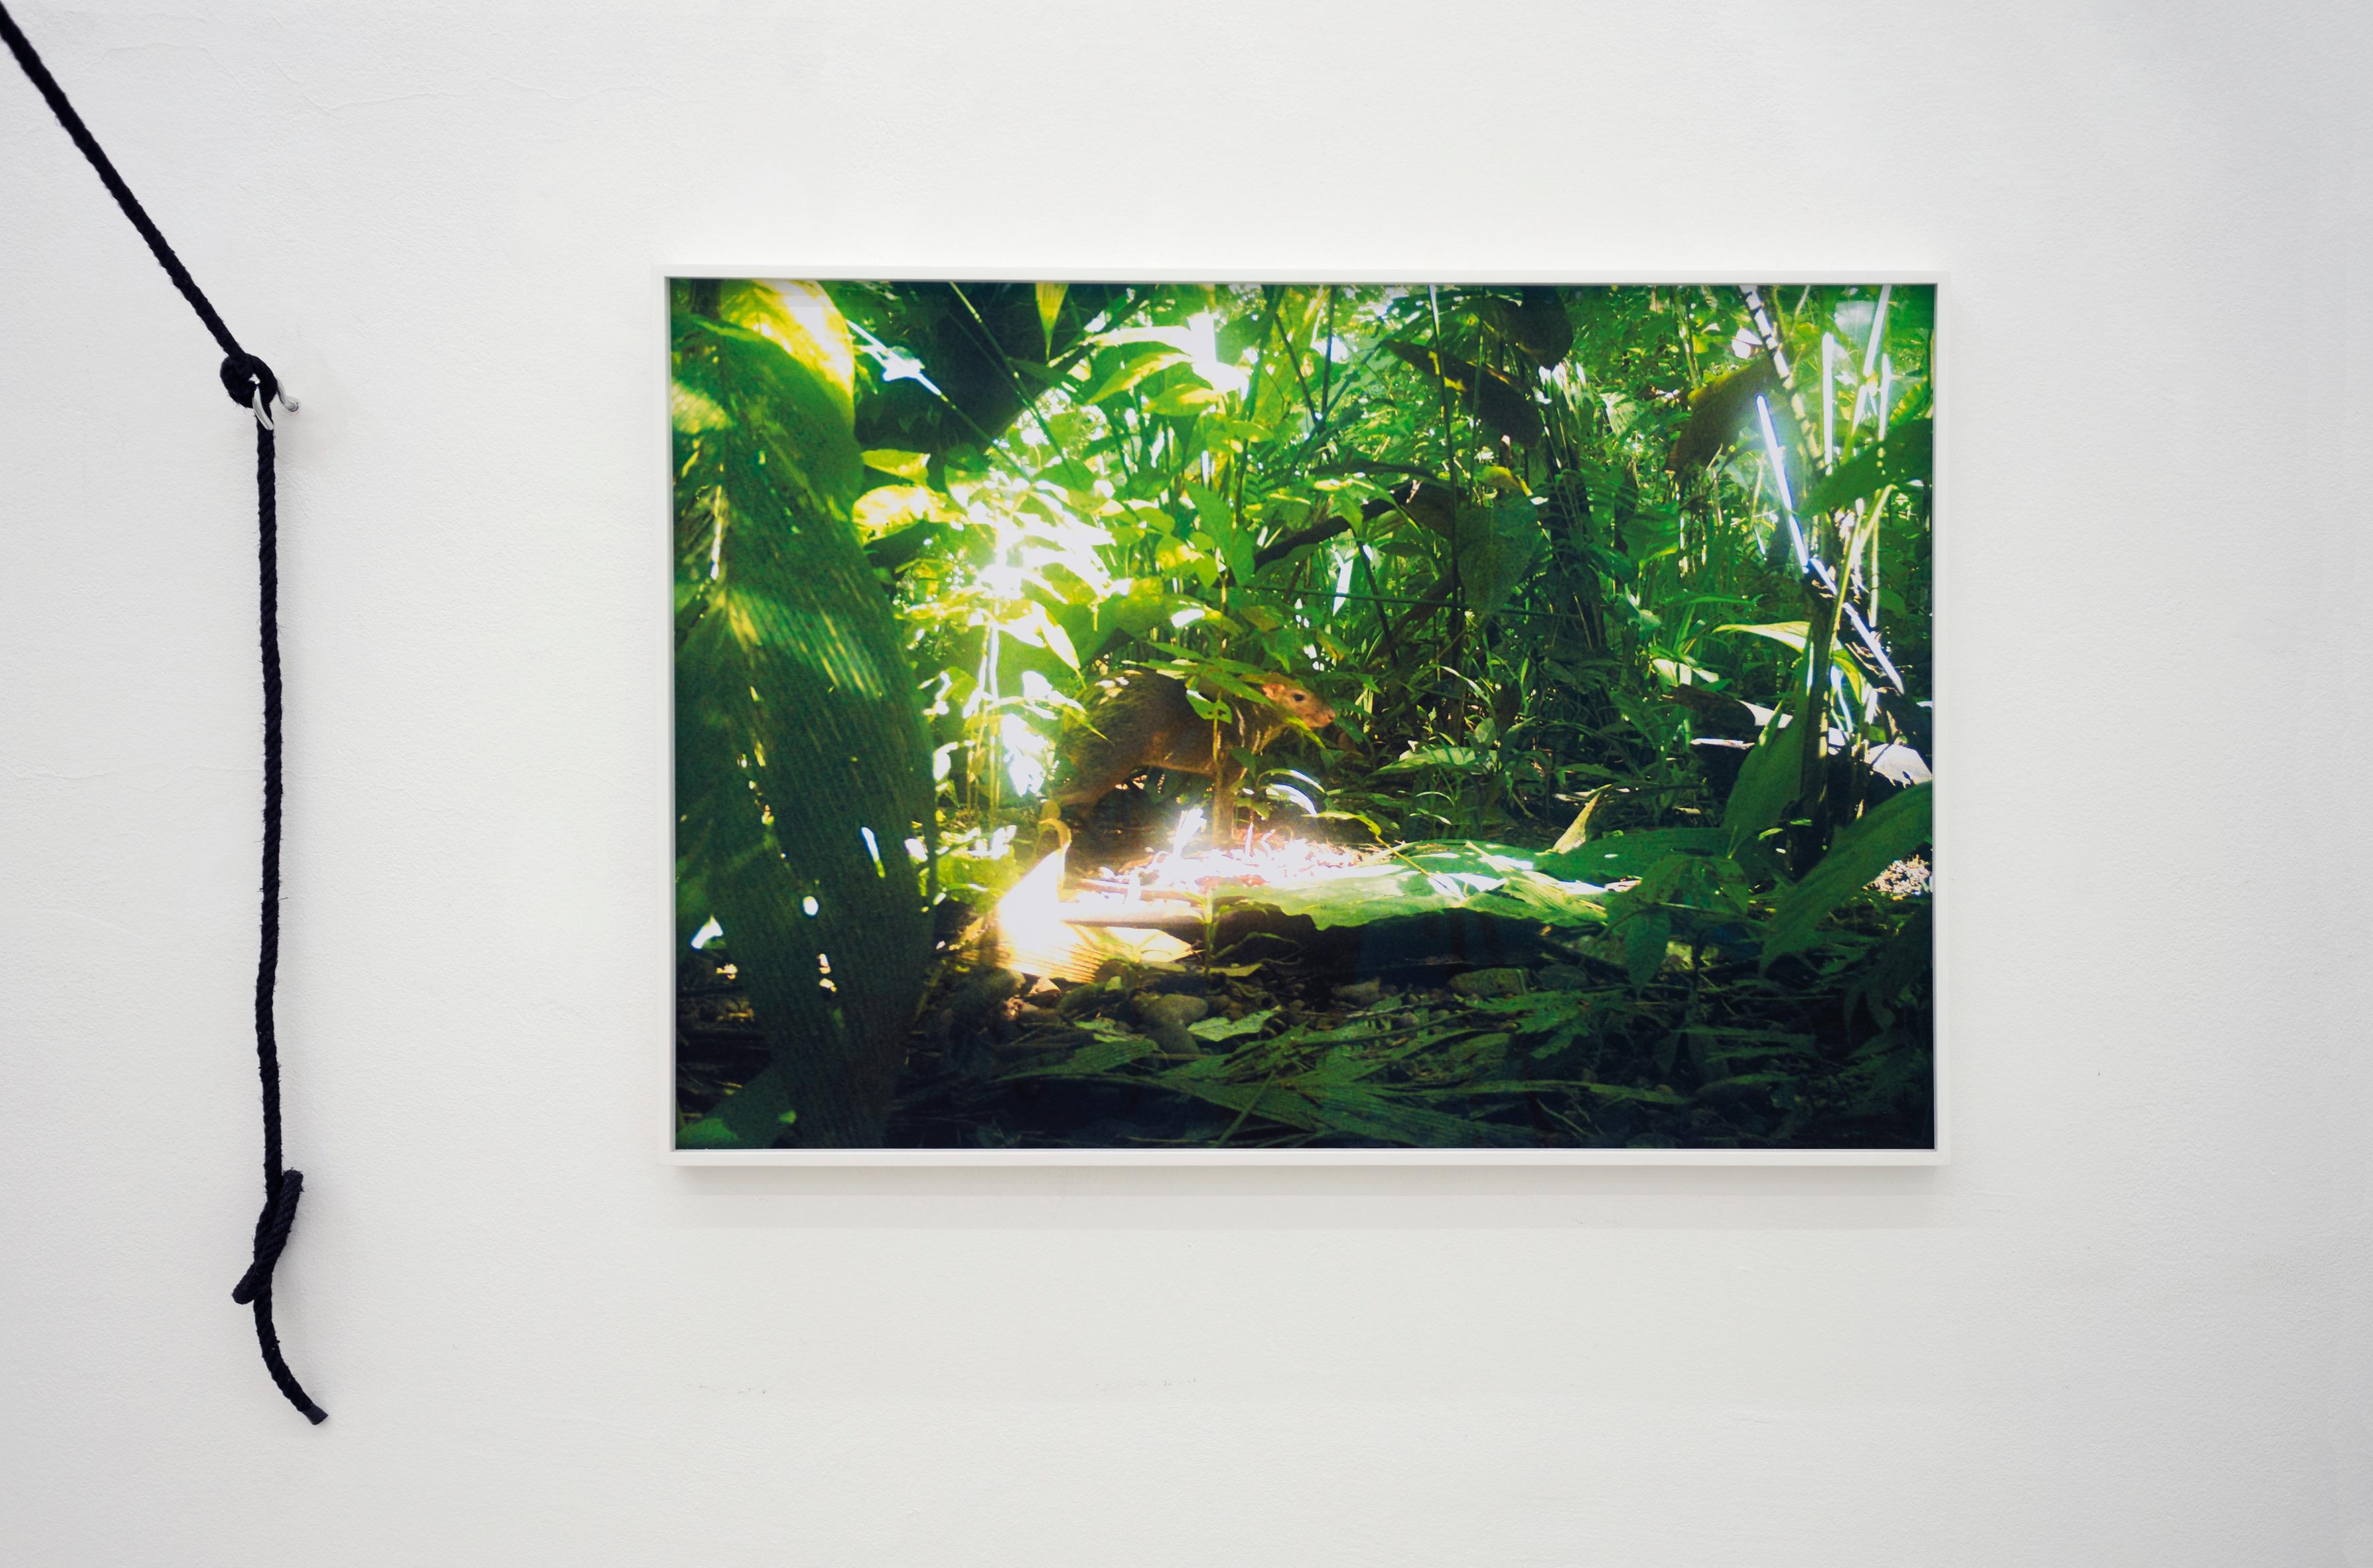 Tina Ribarits
camera trap (Aguti) Ed. 2/3 - Contemporary Color Landscape Jungle Photography
Edition 2/3+2 AP
Print ist unframed and comes with a sticker signed by the artist.

Tina Ribarits works with a conceptual approach in a variety of media